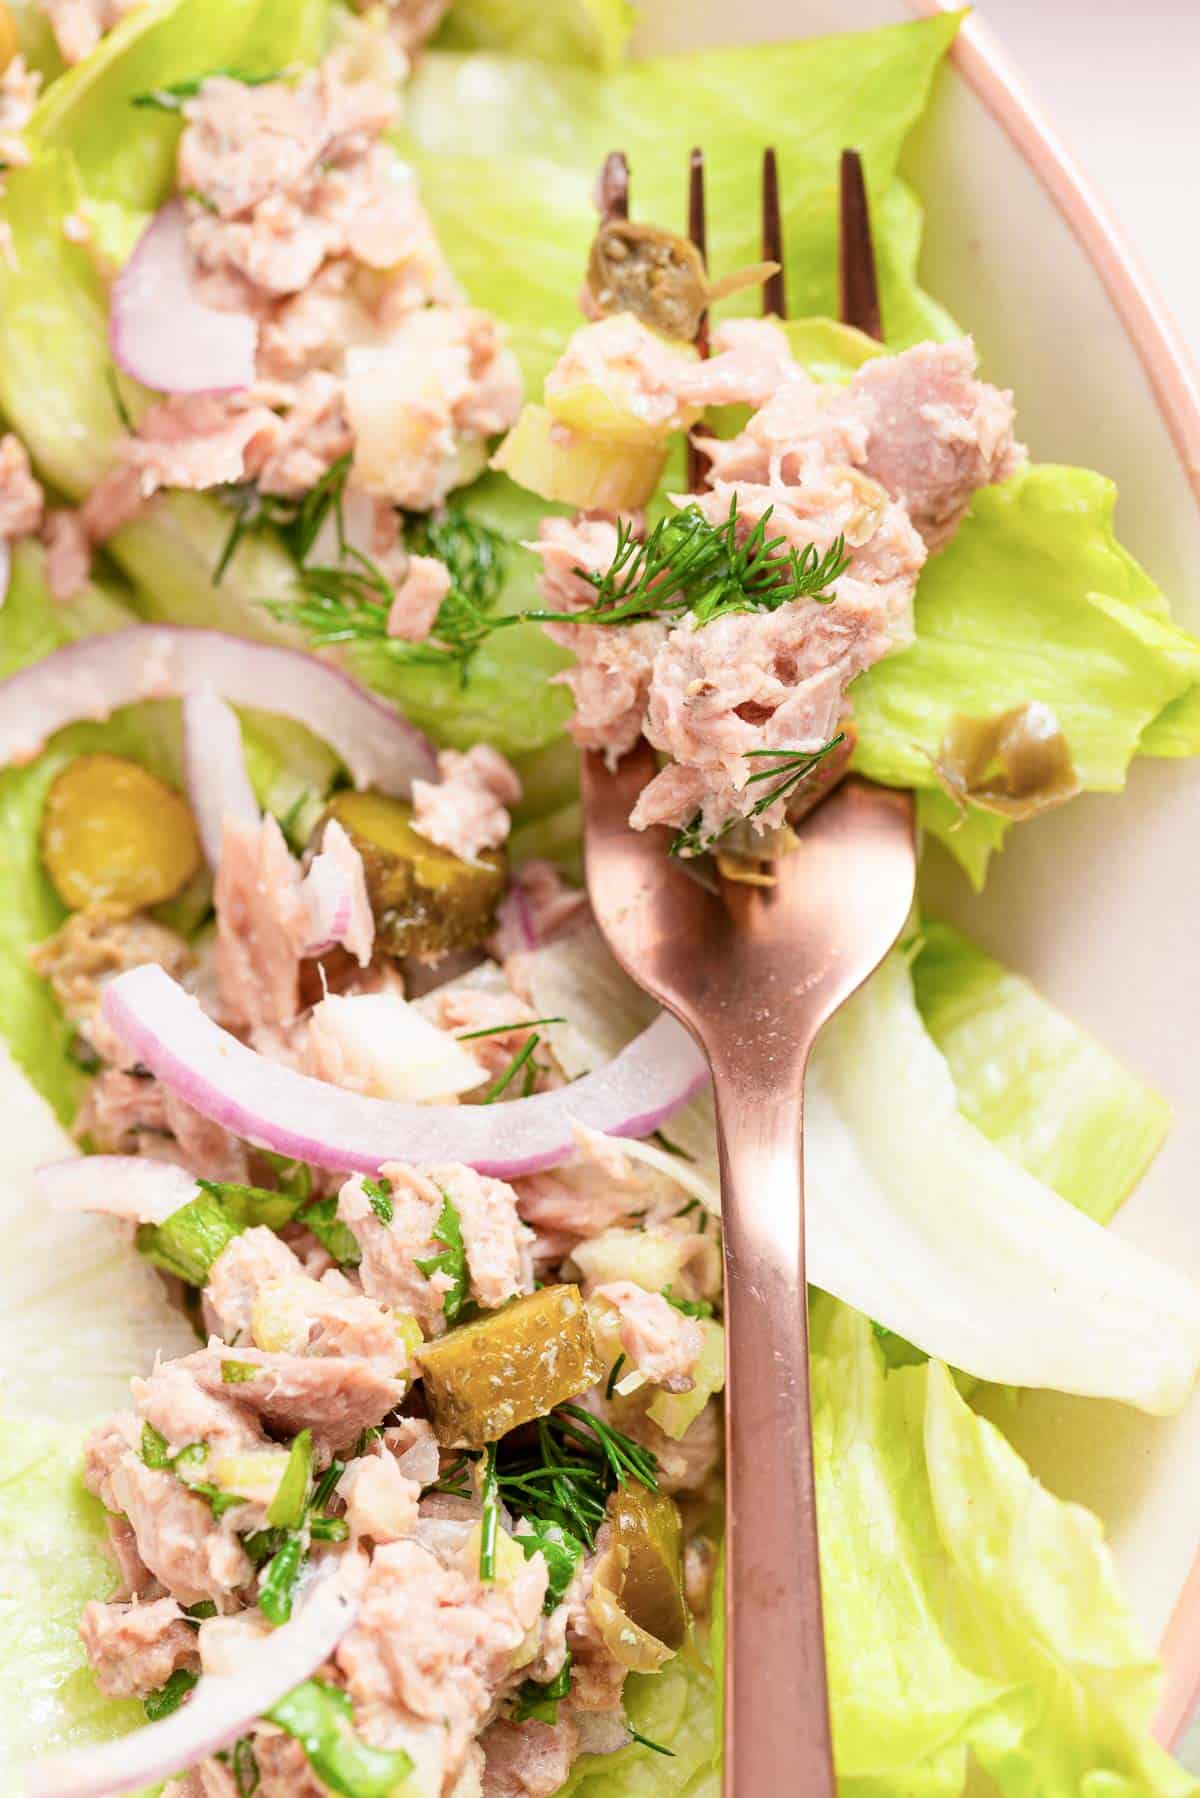 Tuna salad without mayo on a plate with a fork.